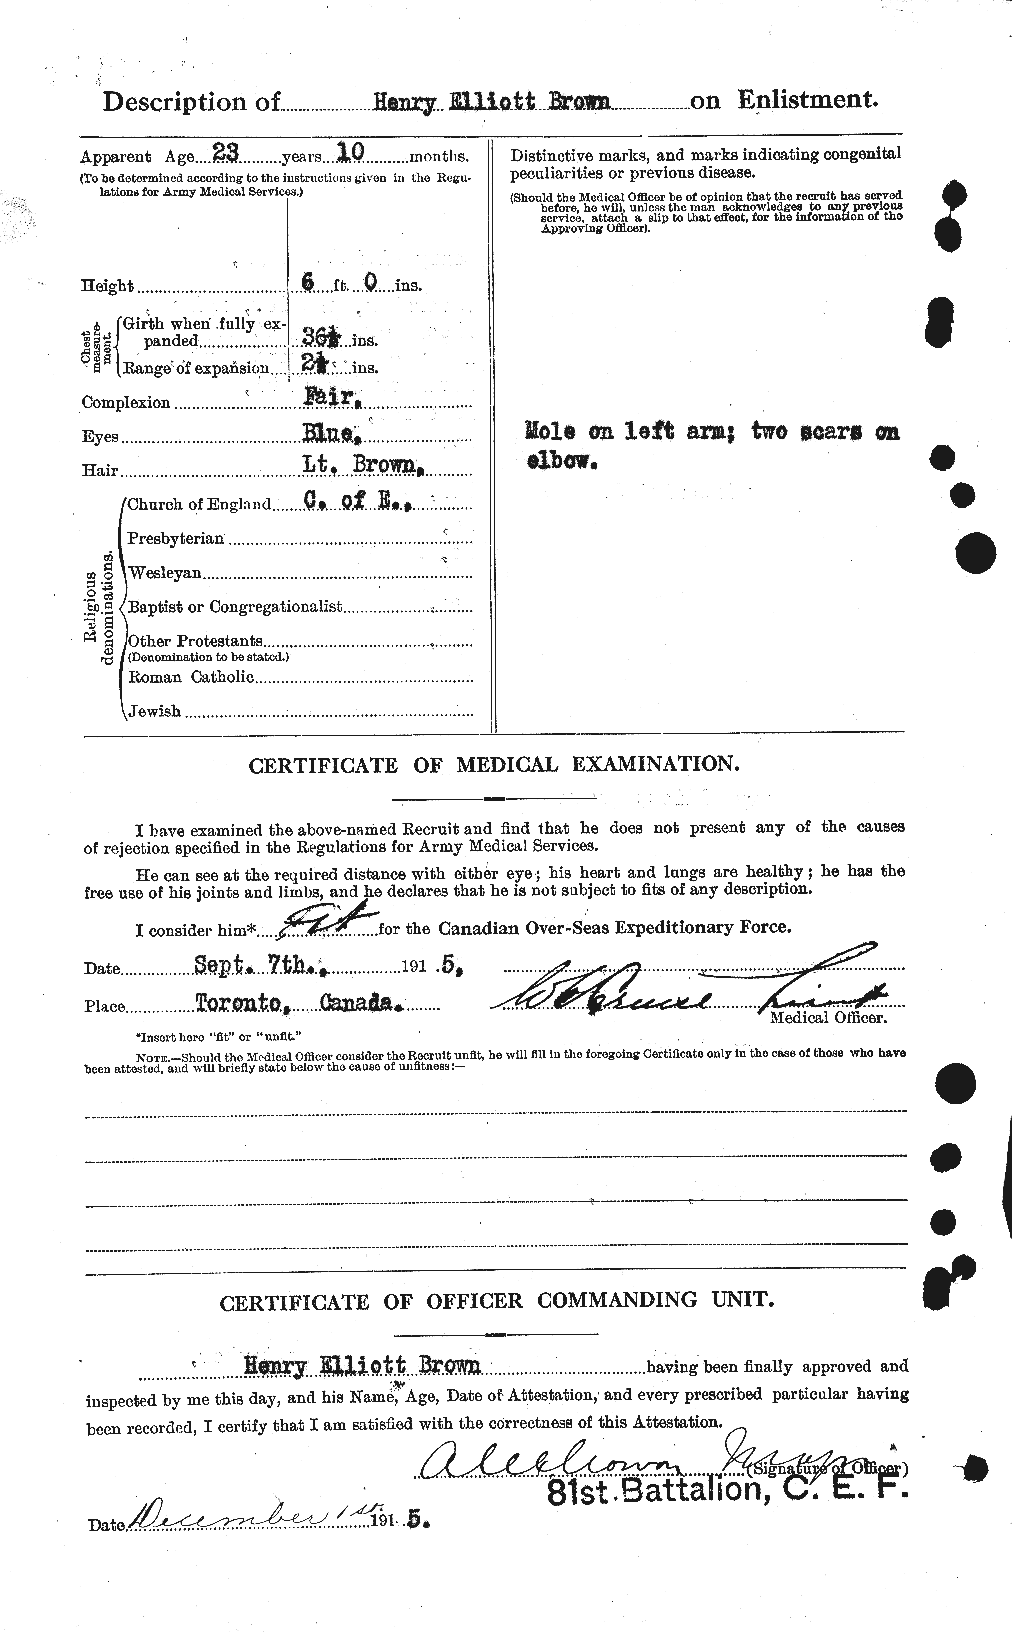 Personnel Records of the First World War - CEF 265527b